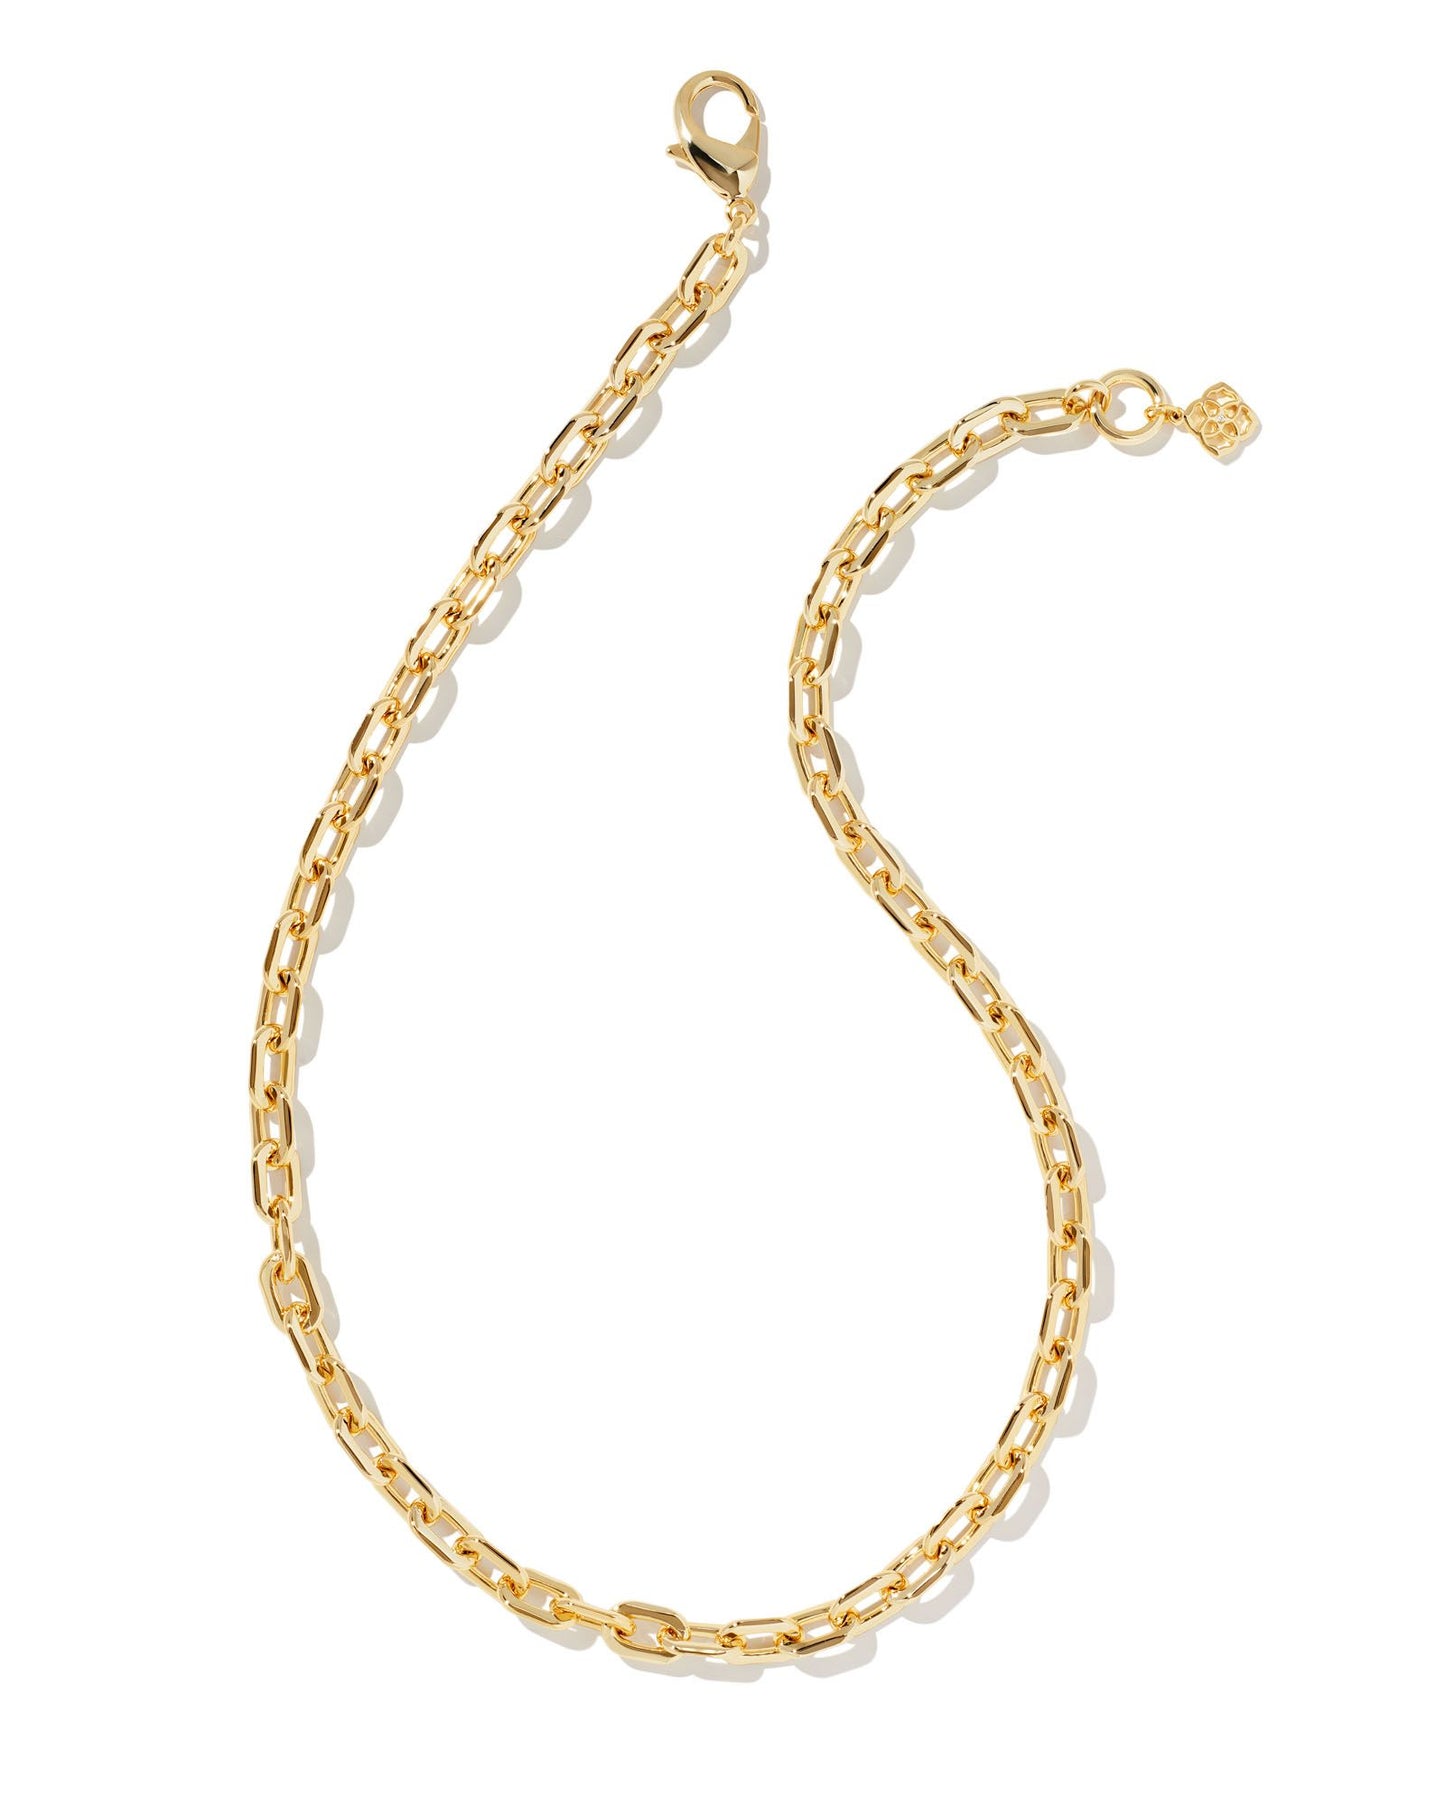 Kendra Scott Korinne Chain Necklace Gold Metal-Necklaces-Kendra Scott-N1857GLD-The Twisted Chandelier